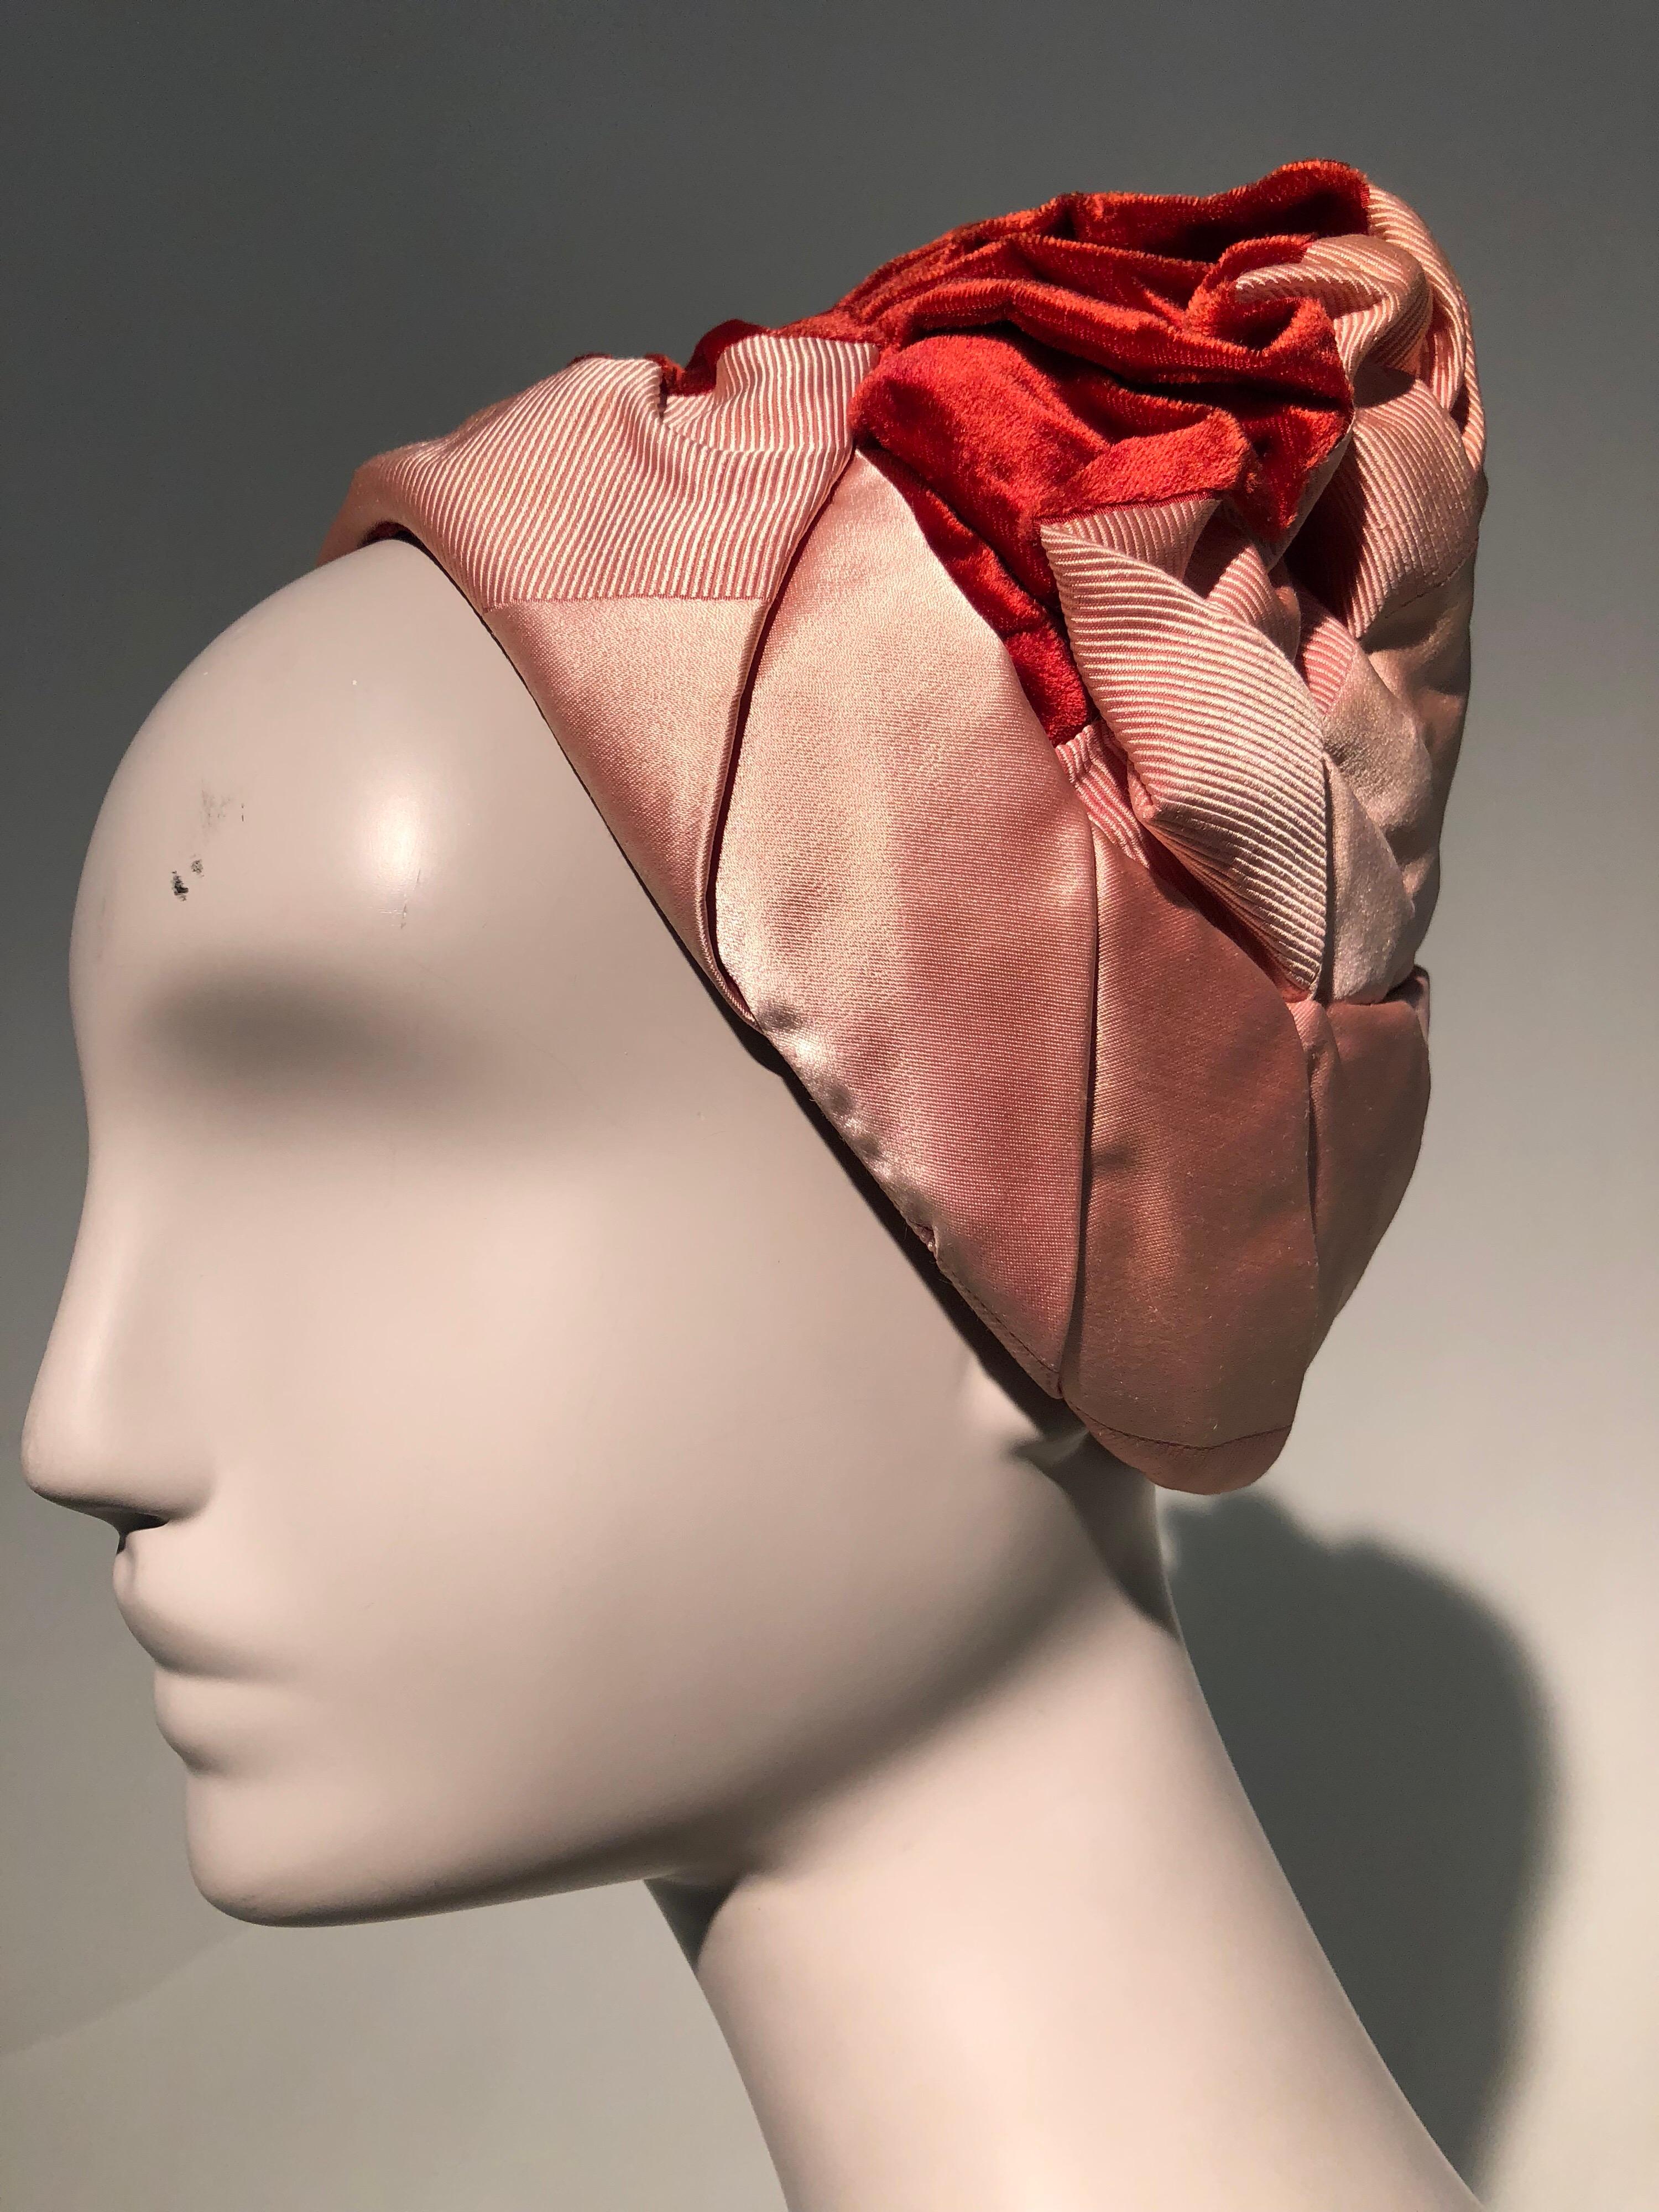 A wonderful 1950s Miss Dior turban-style hat by Christian Dior in red velvet, pink satin and faille. A row of soft gathers at crown lends this hat a lovely volume. Base is stiffened lace. 